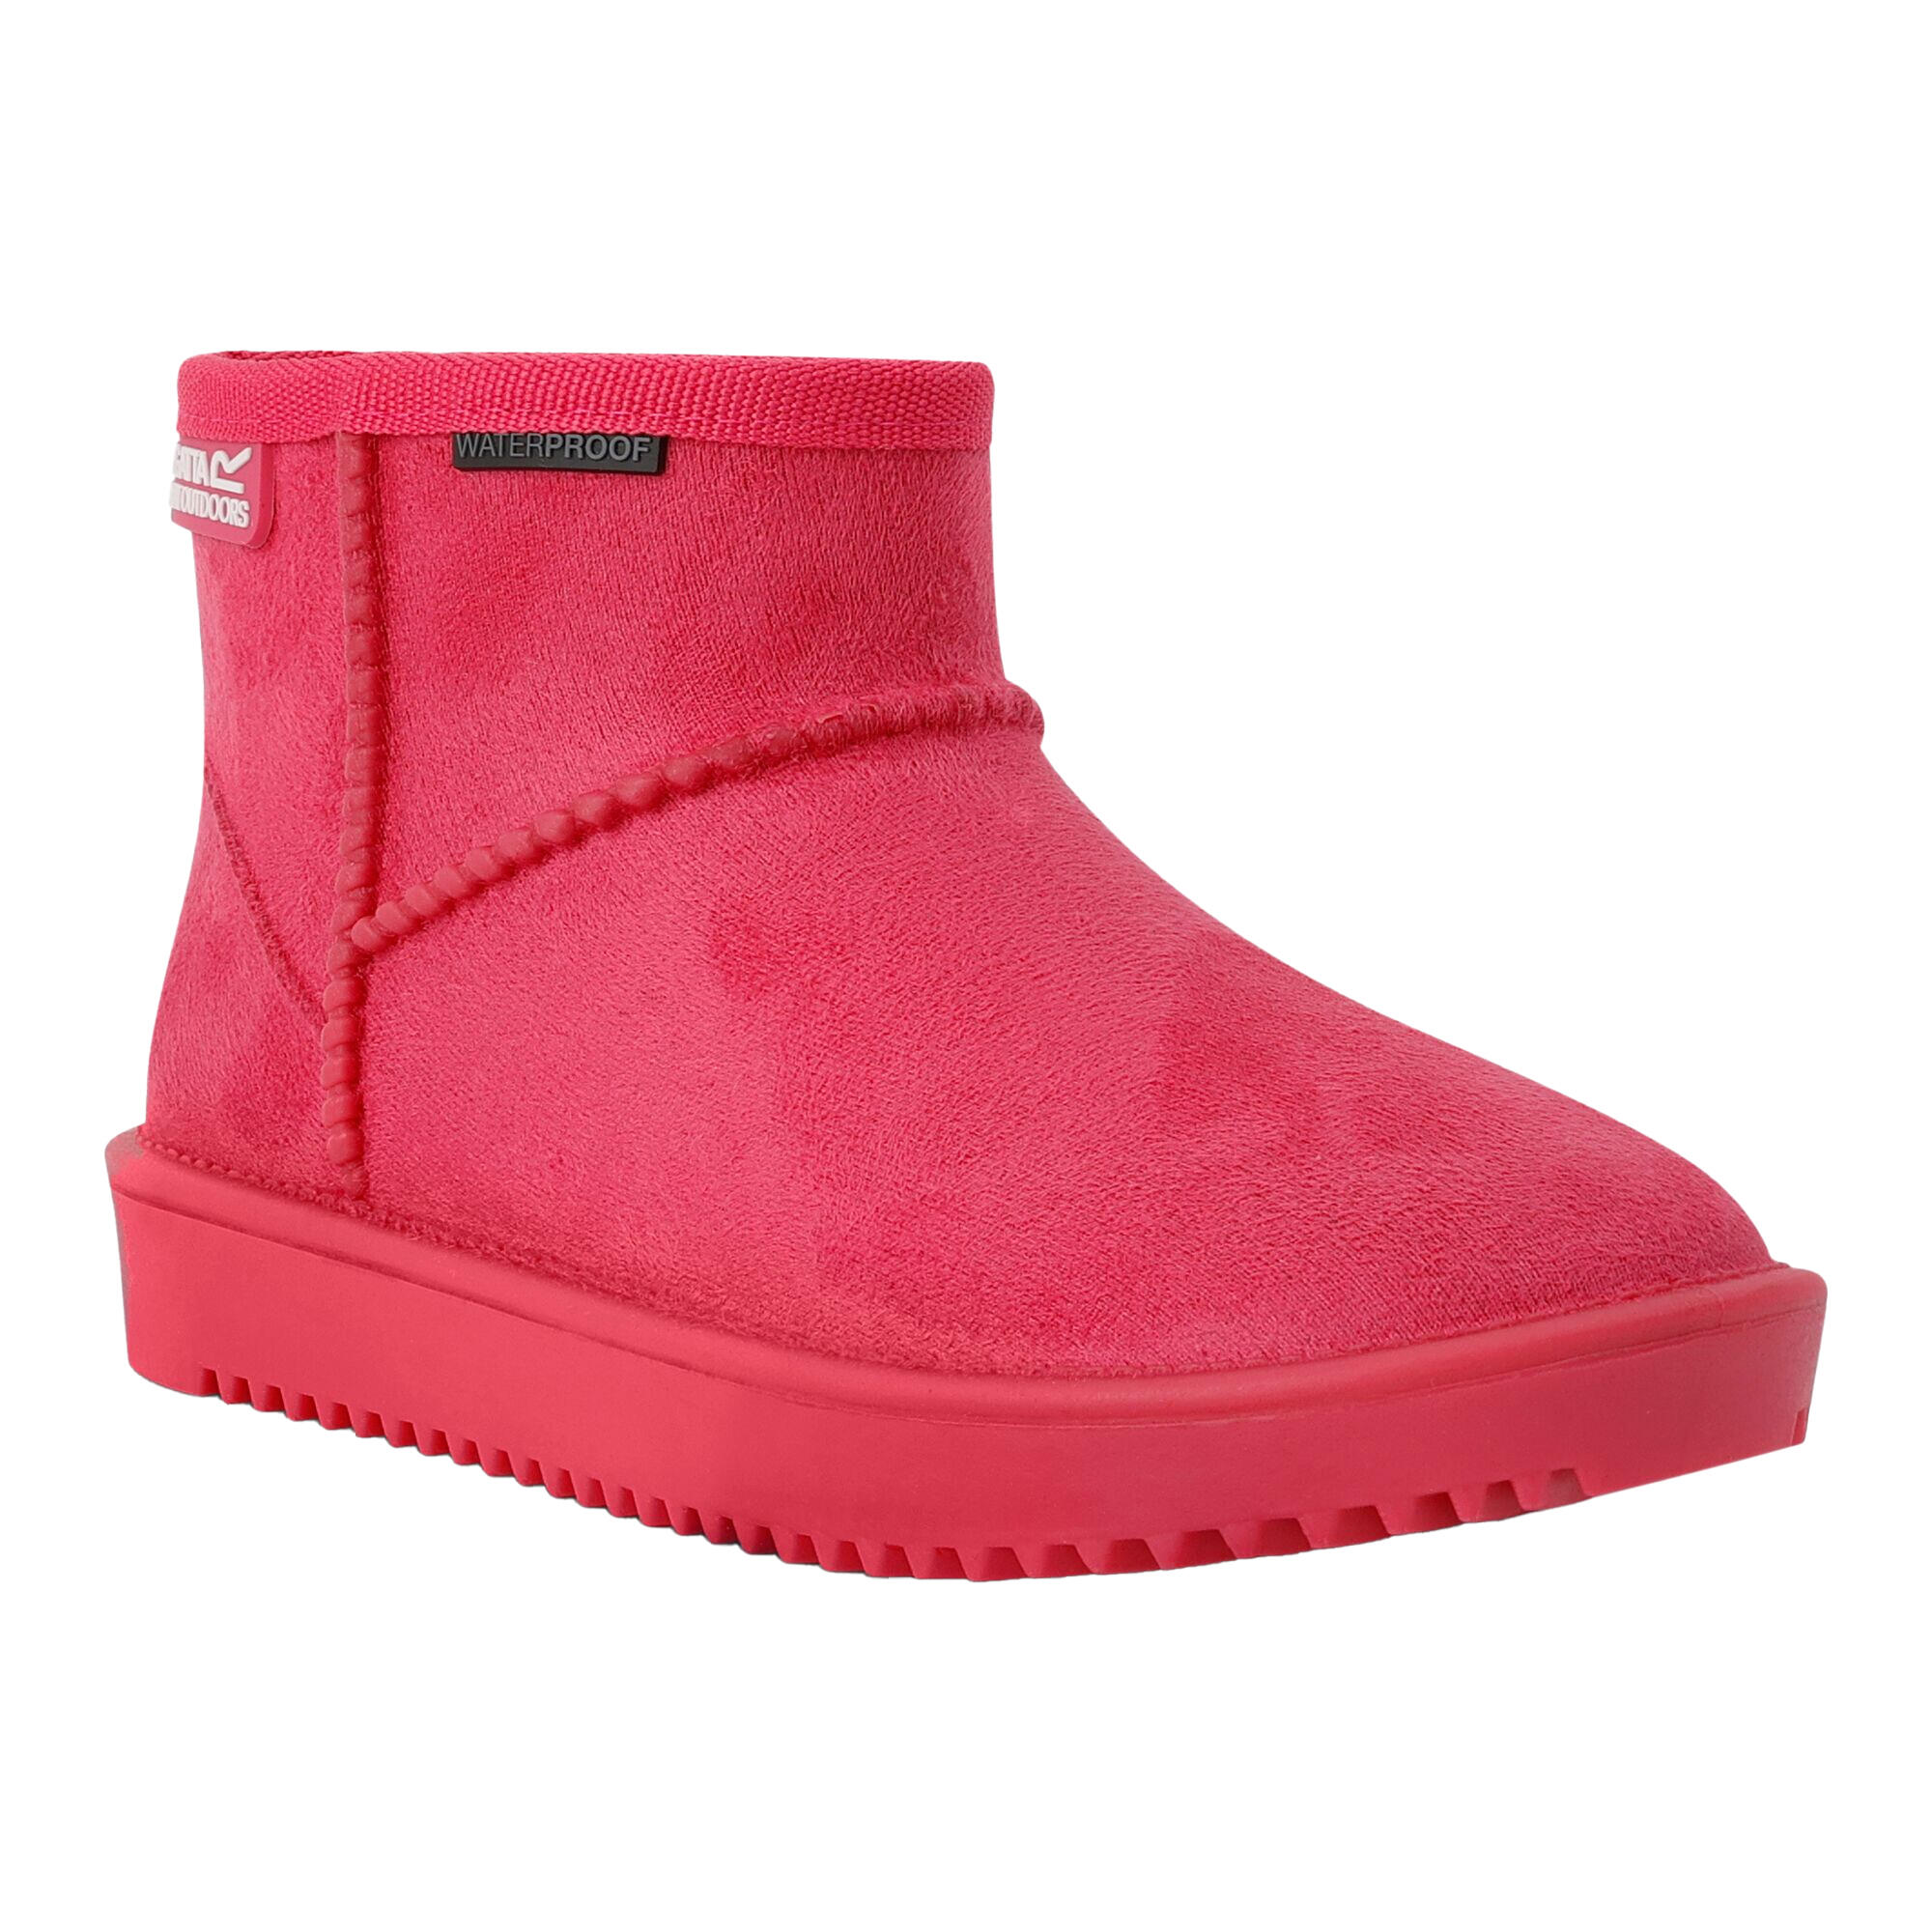 REGATTA Childrens/Kids Risely Faux Fur Lined Waterproof Snow Boots (Pink Potion)